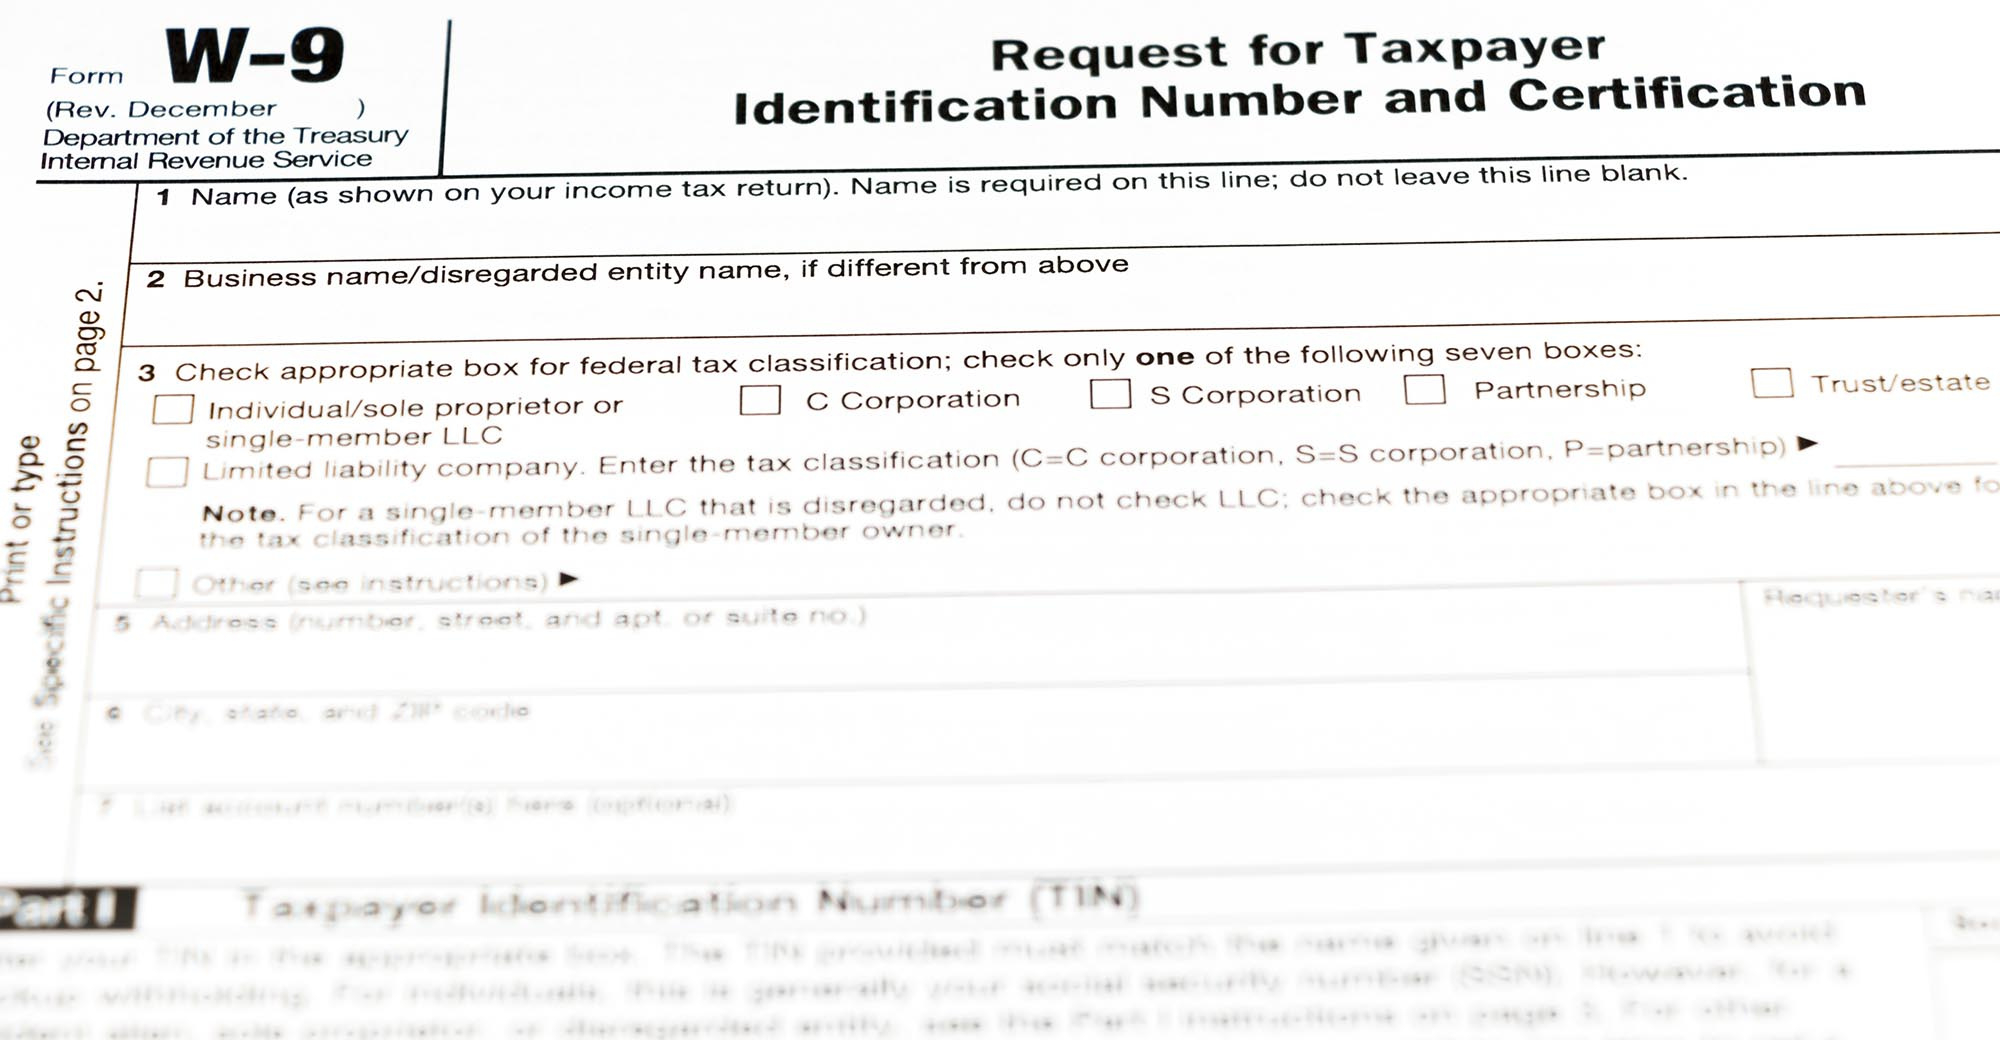 Irs Form W-9 Changes And Their Impact On Trusts And Estates inside Irs I9 Form